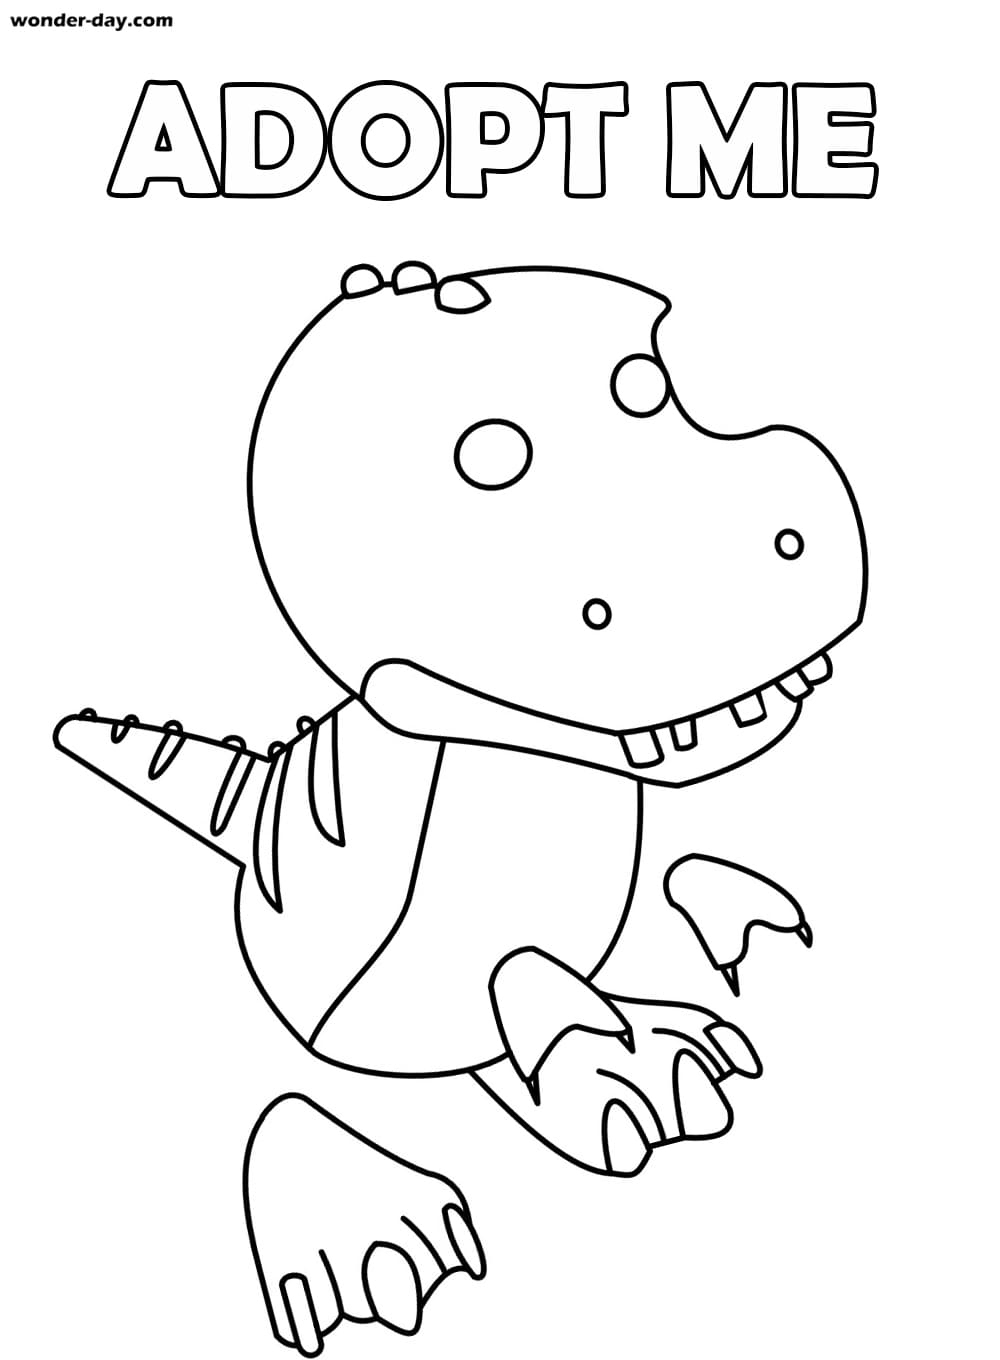 Adopt Me Coloring Pages | Wonder-Day tout Dessin Adopt Me